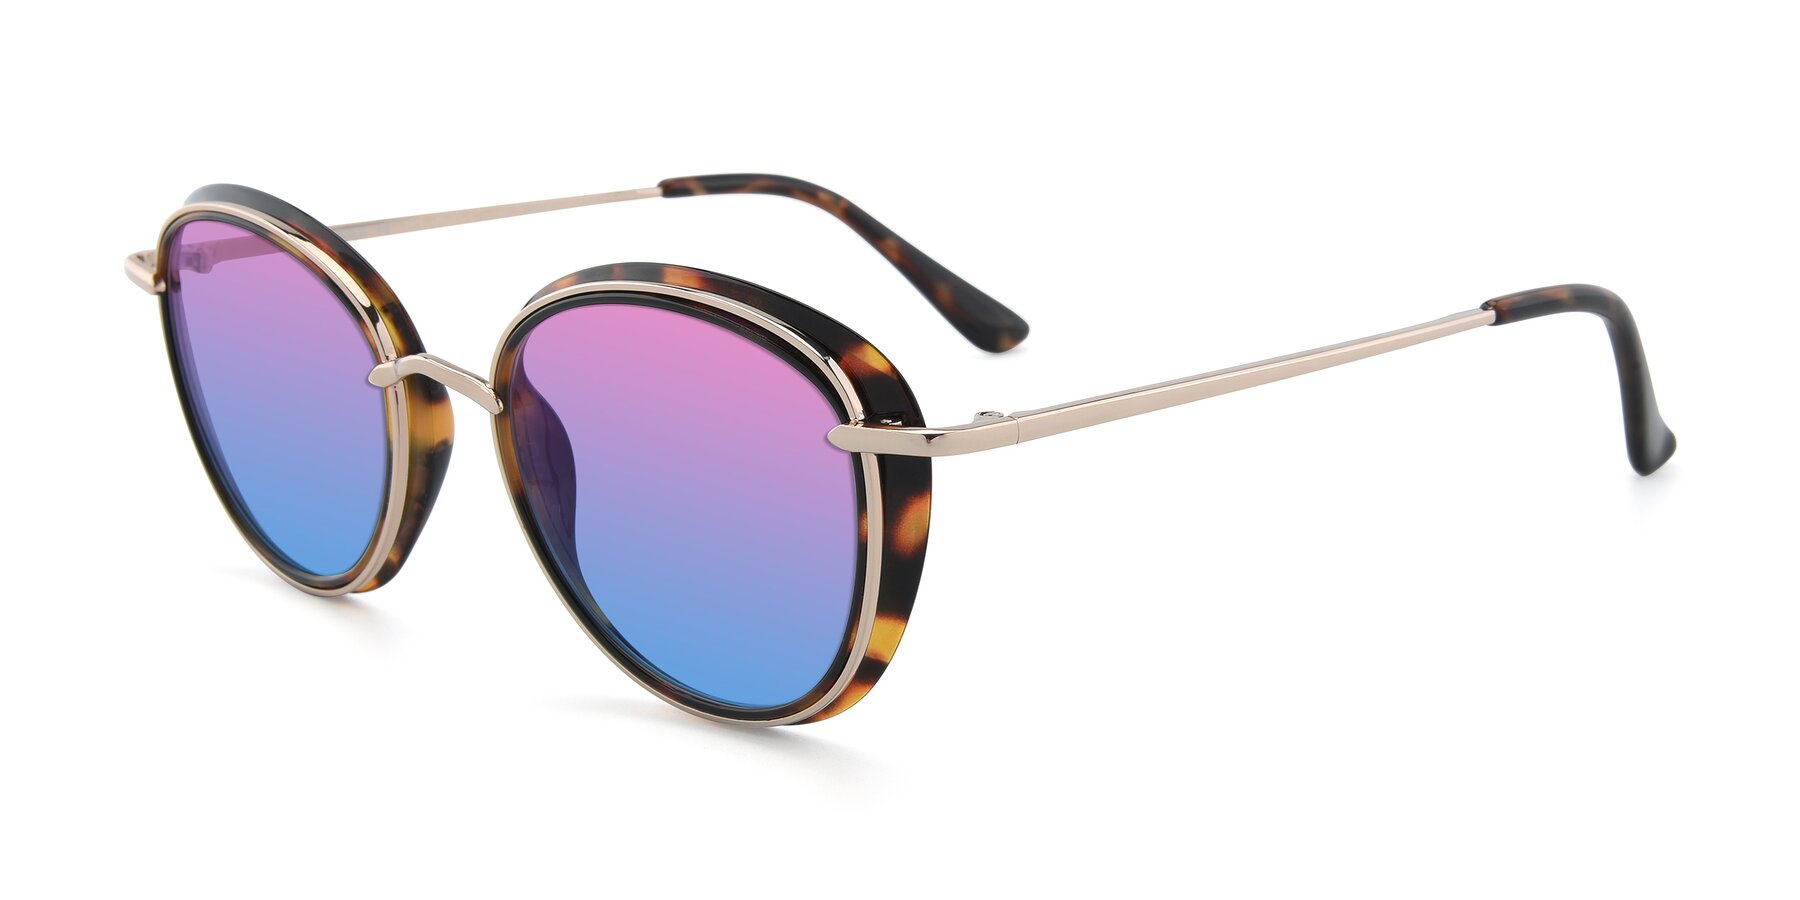 Angle of Cosmopolitan in Tortoise-Silver with Pink / Blue Gradient Lenses